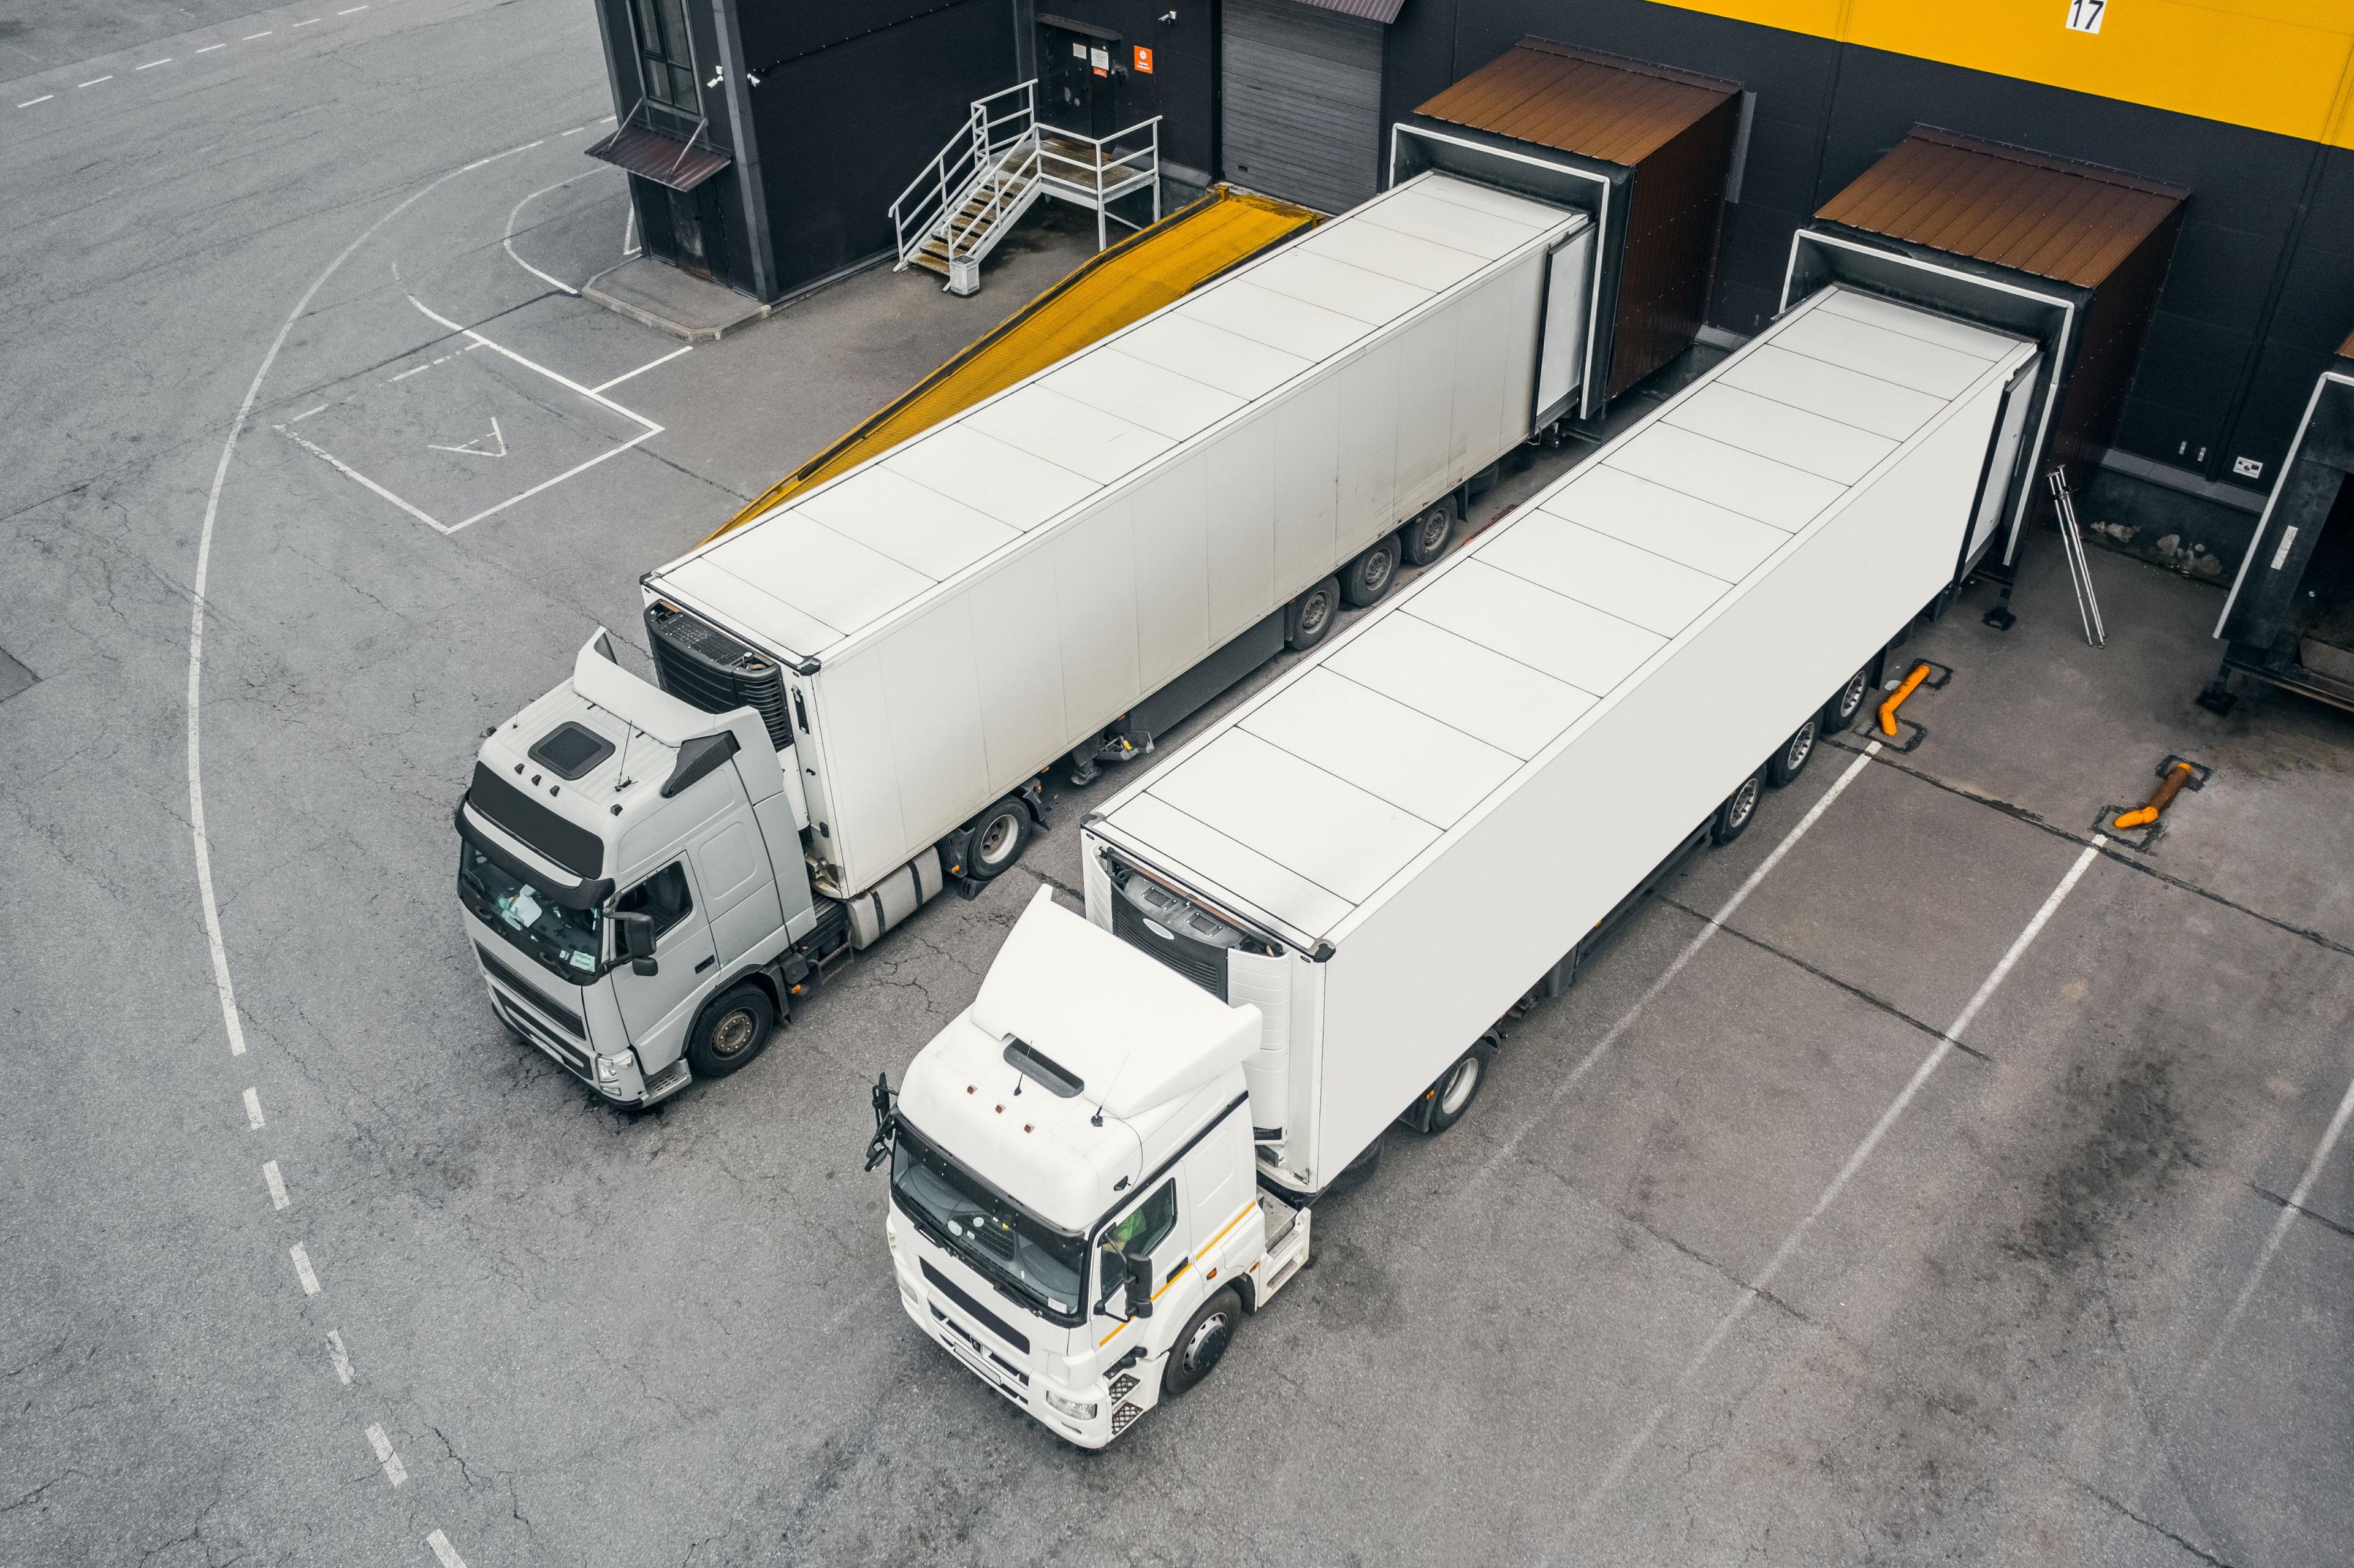 Aerial view of two HGVs parked at a warehouse